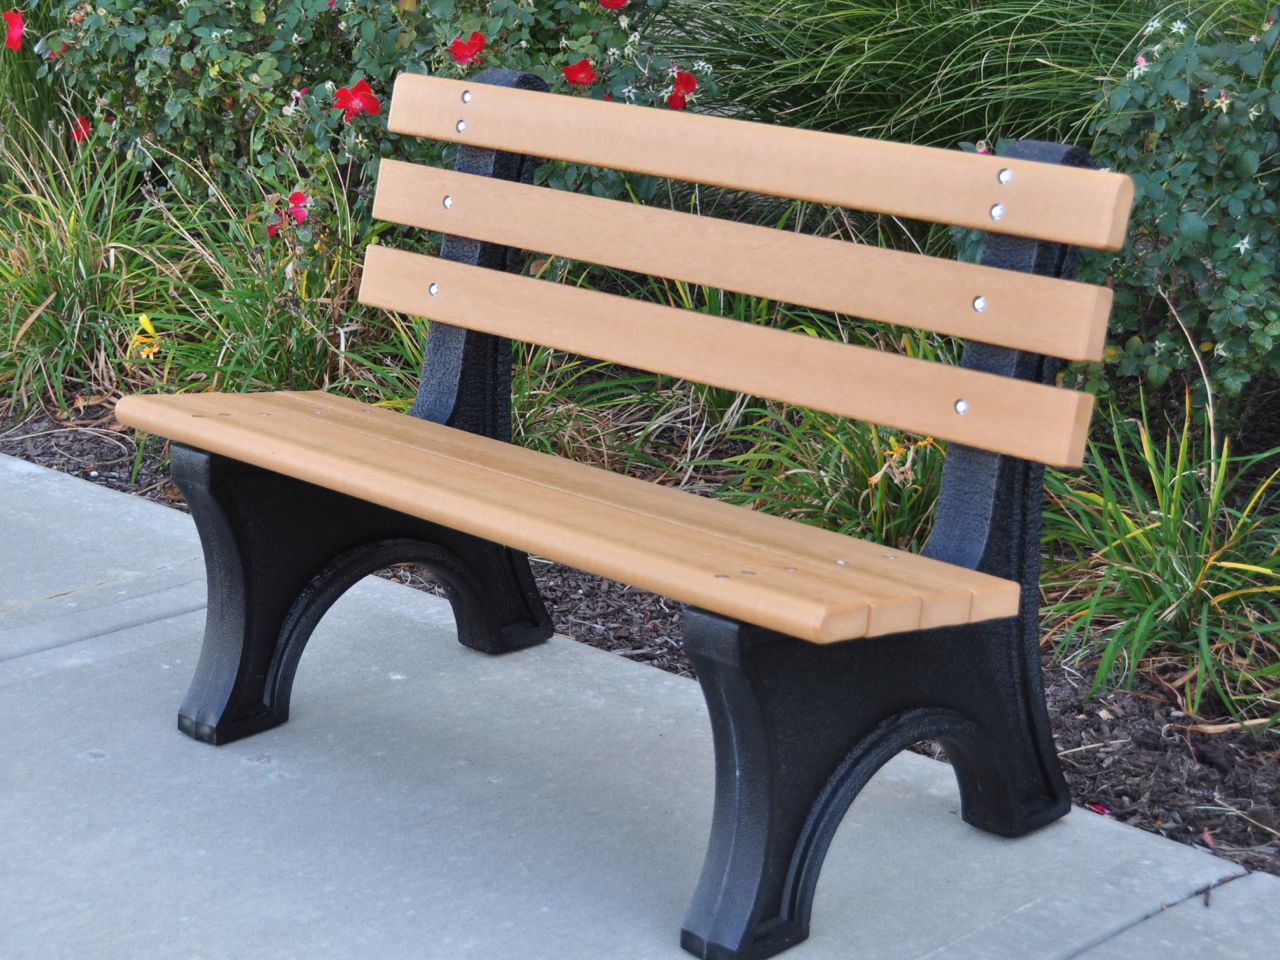 comfort park avenue bench by jayhawk plastics - outdoor benches for parks DTXMBBF